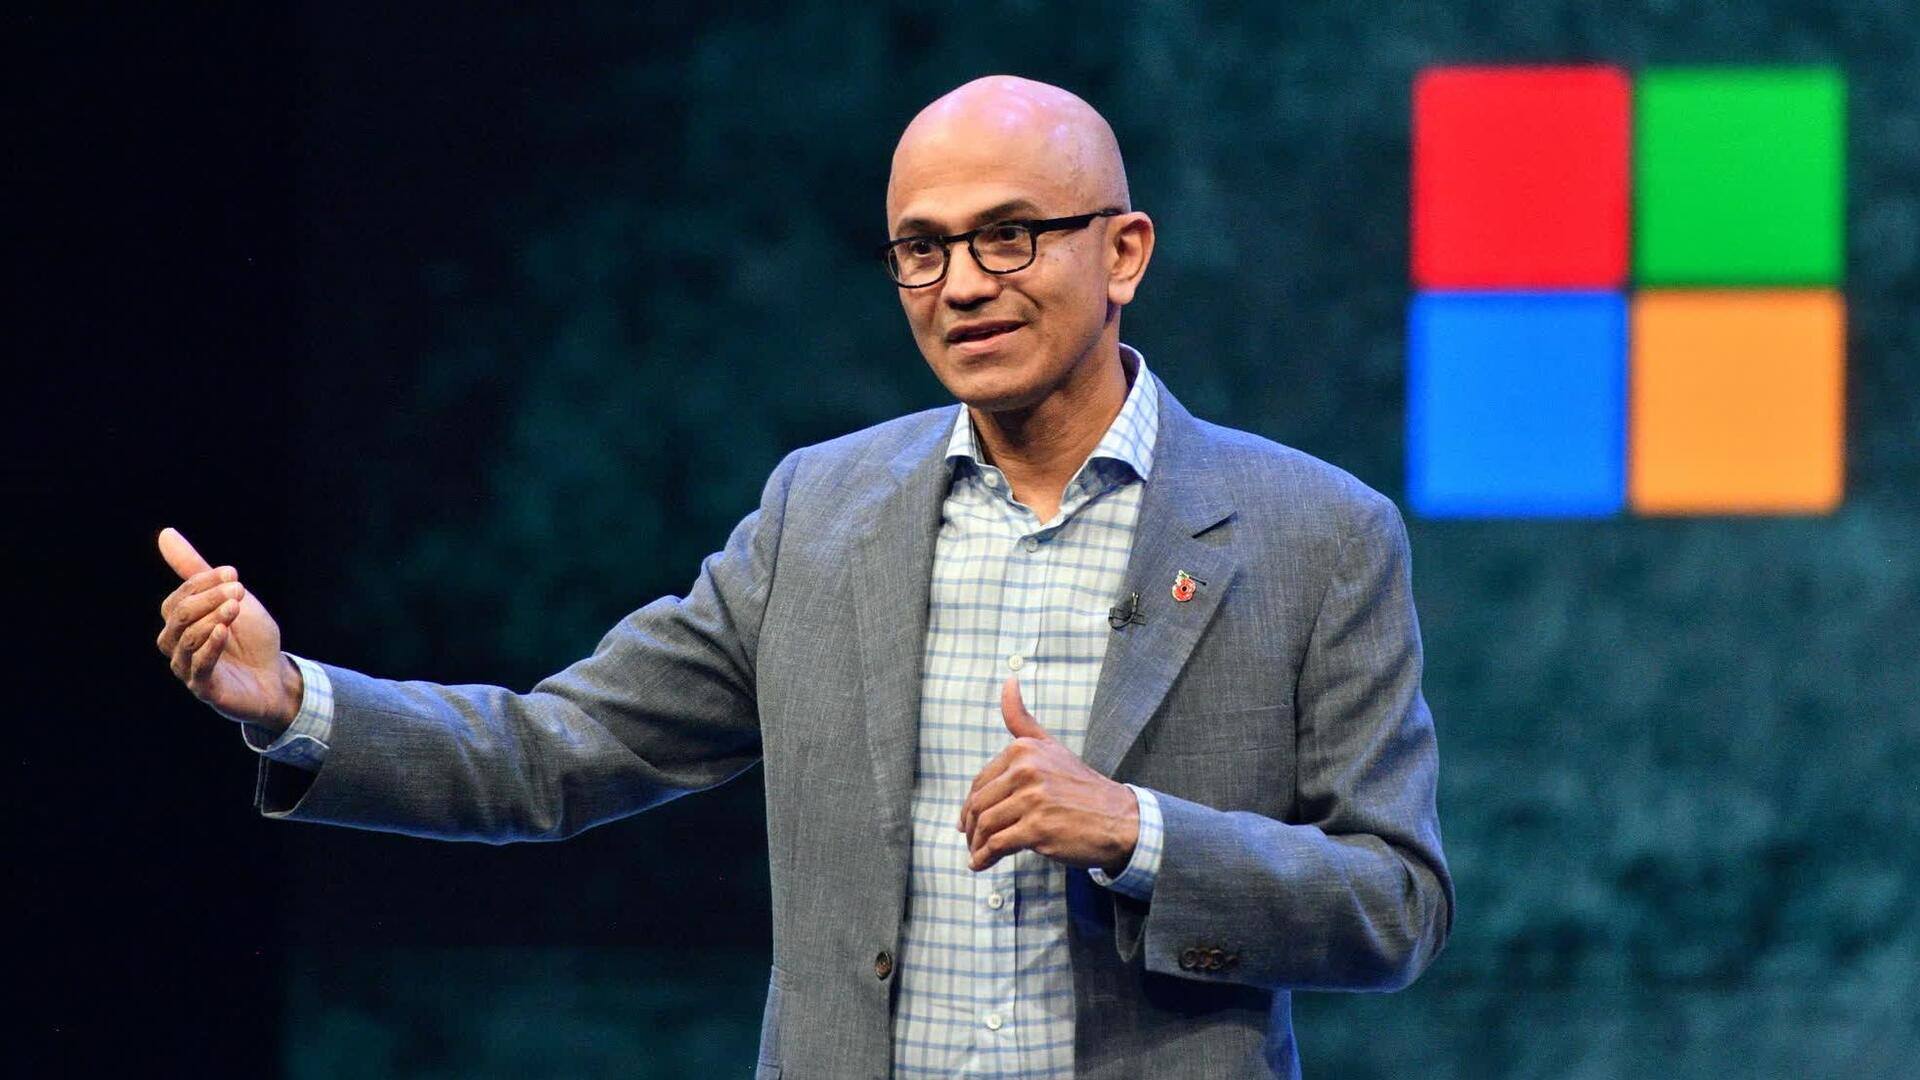 Microsoft to train 2M people in India with AI skills